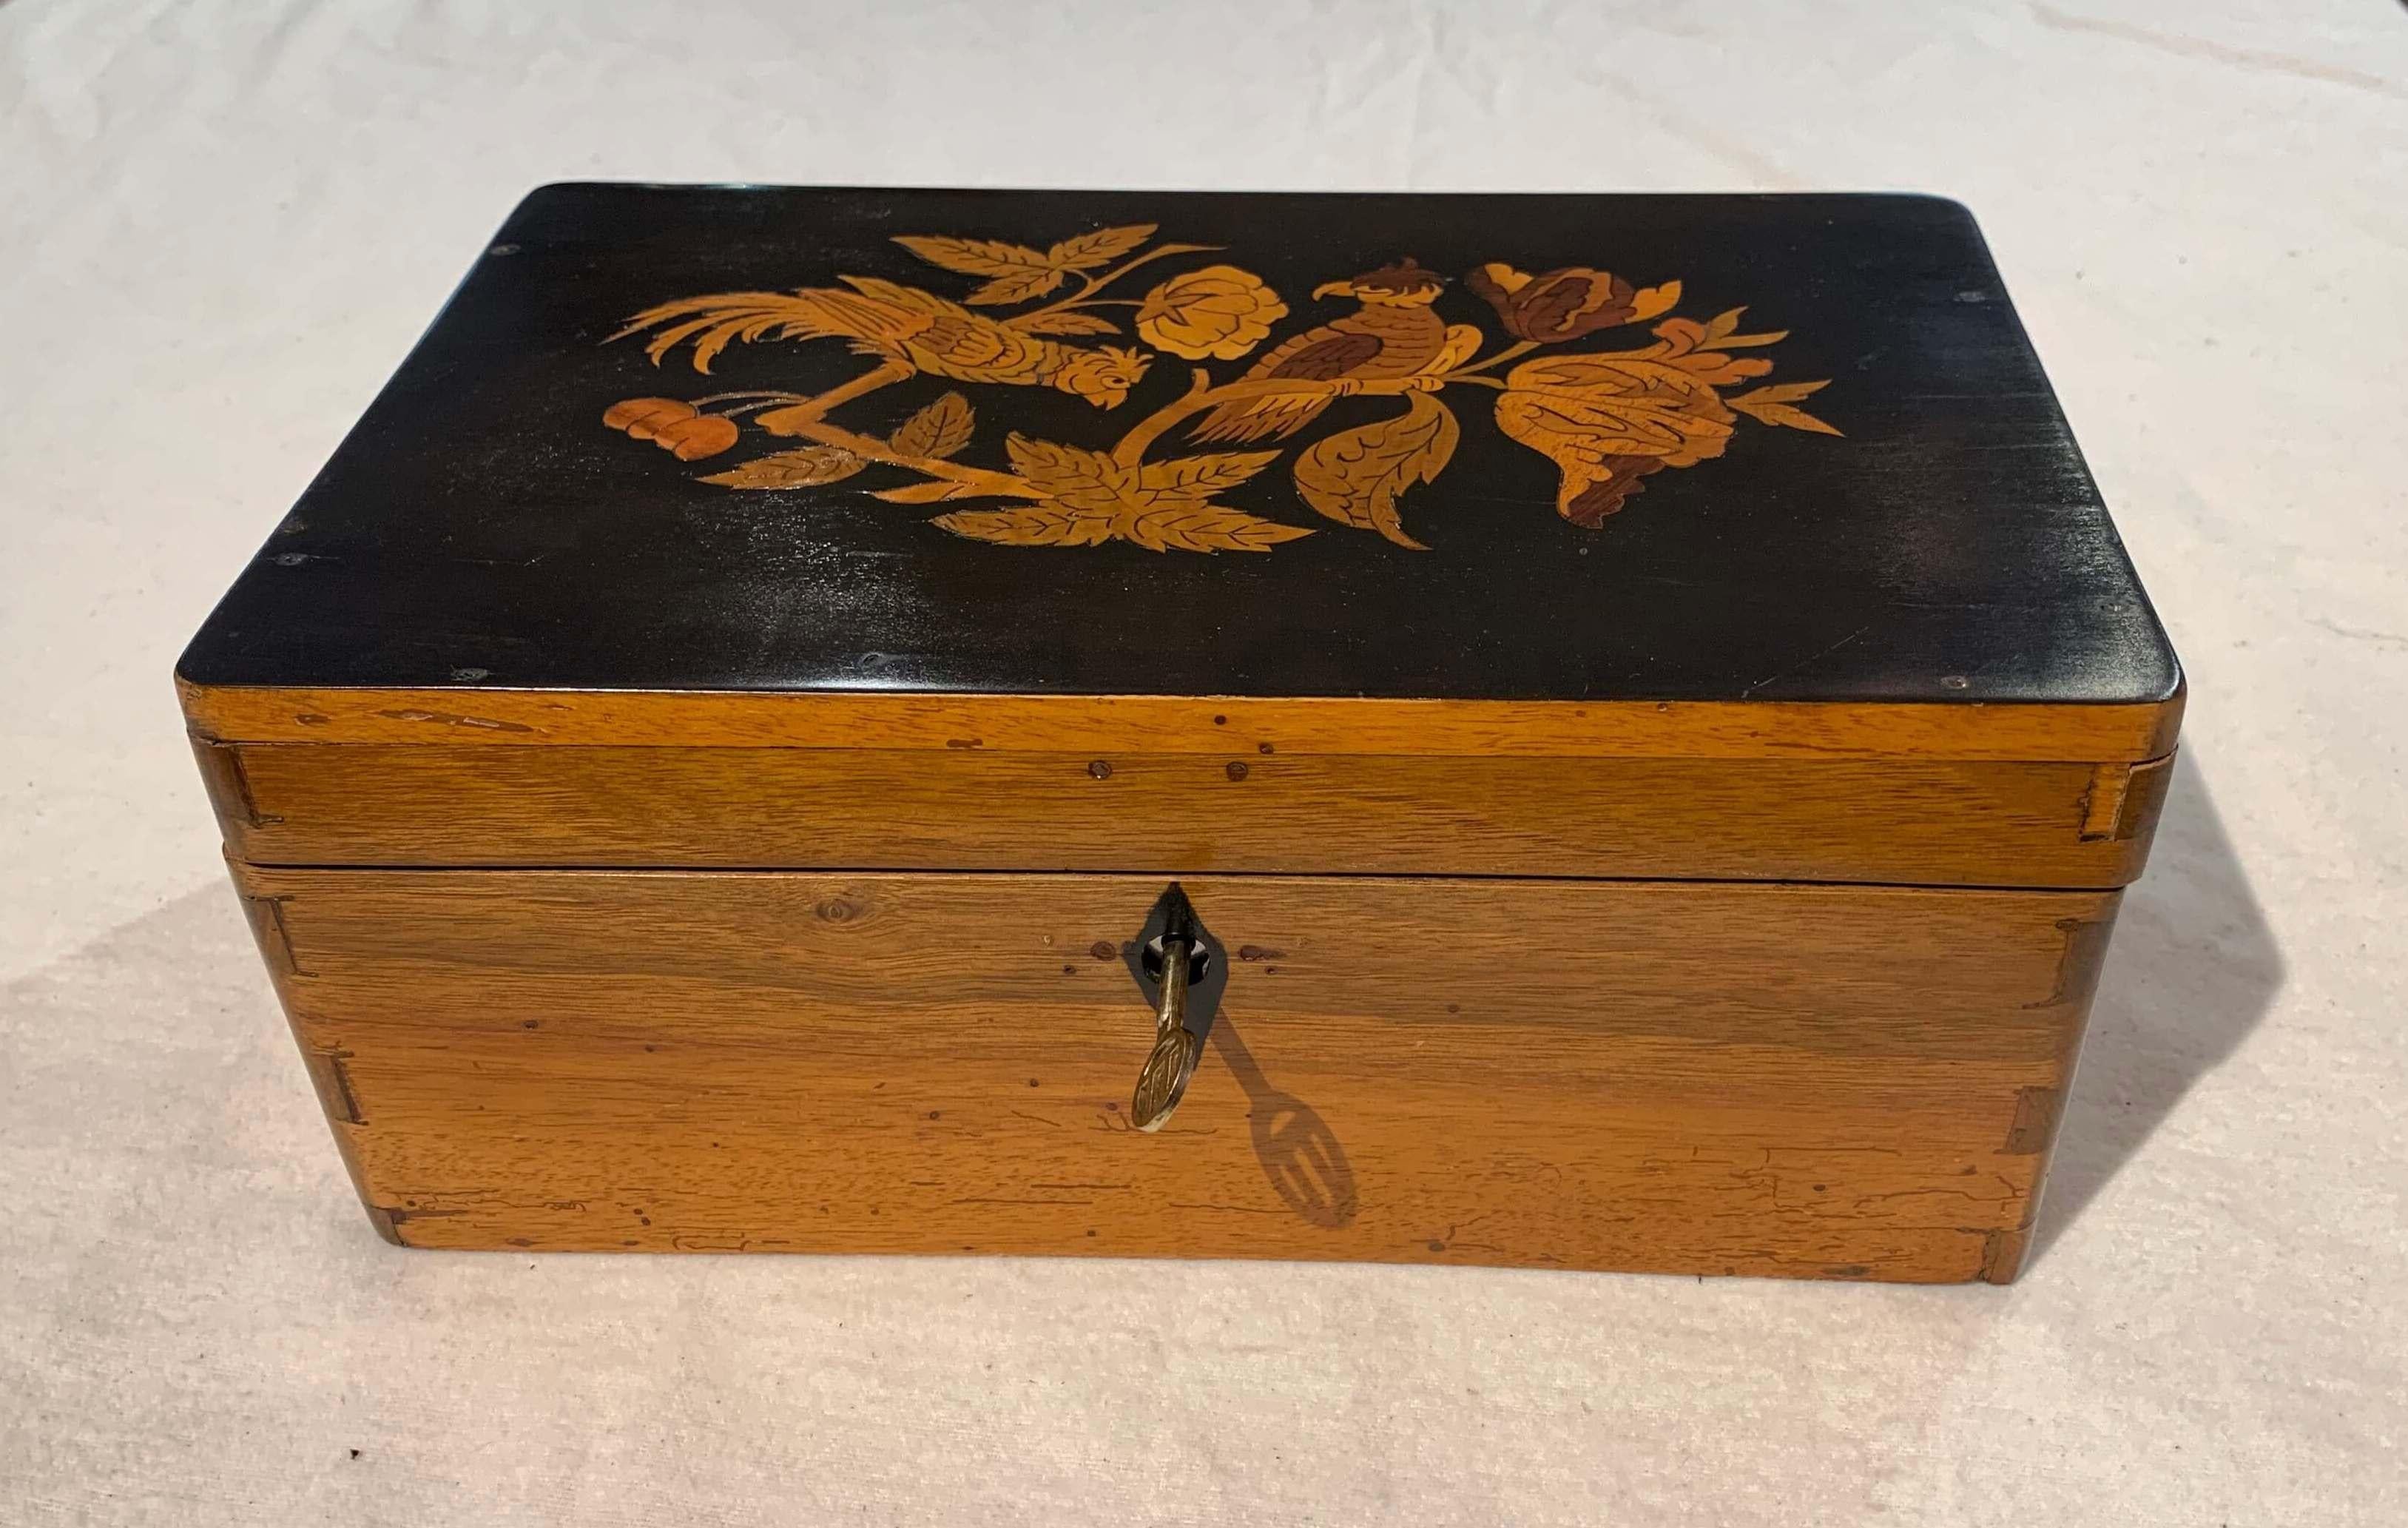 Wonderful Neoclassical late Biedermeier decorative Box from South Germany about 1840.

Ebony top, inlayed with green-red-yellow colored wood (2 Birds on a limb)
Walnut solid wood at the sides with regular wood connection (mortise and tenon).